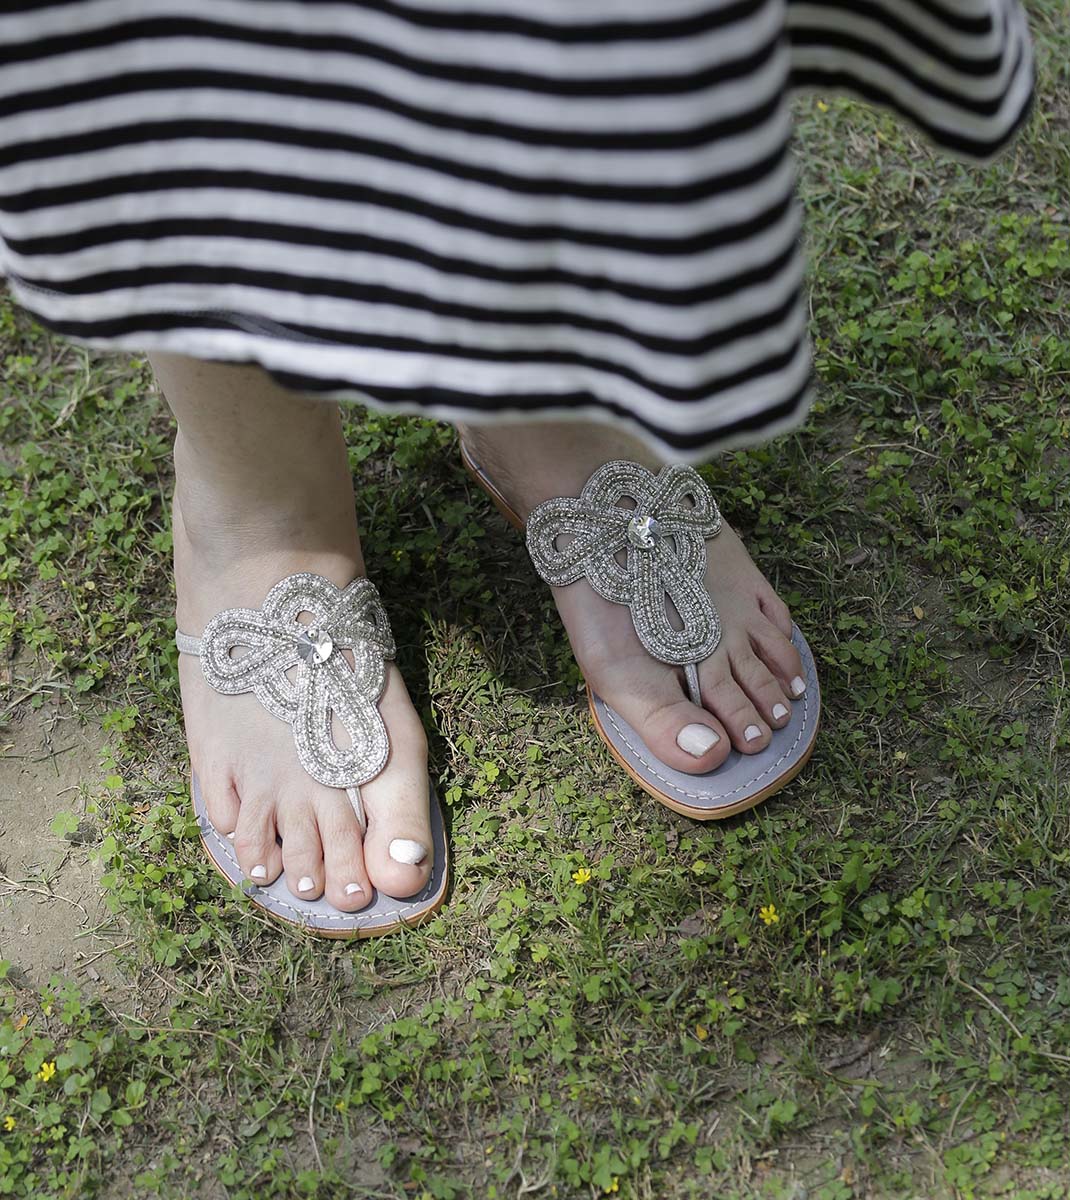 Farah Silver  Embroidery Sandals